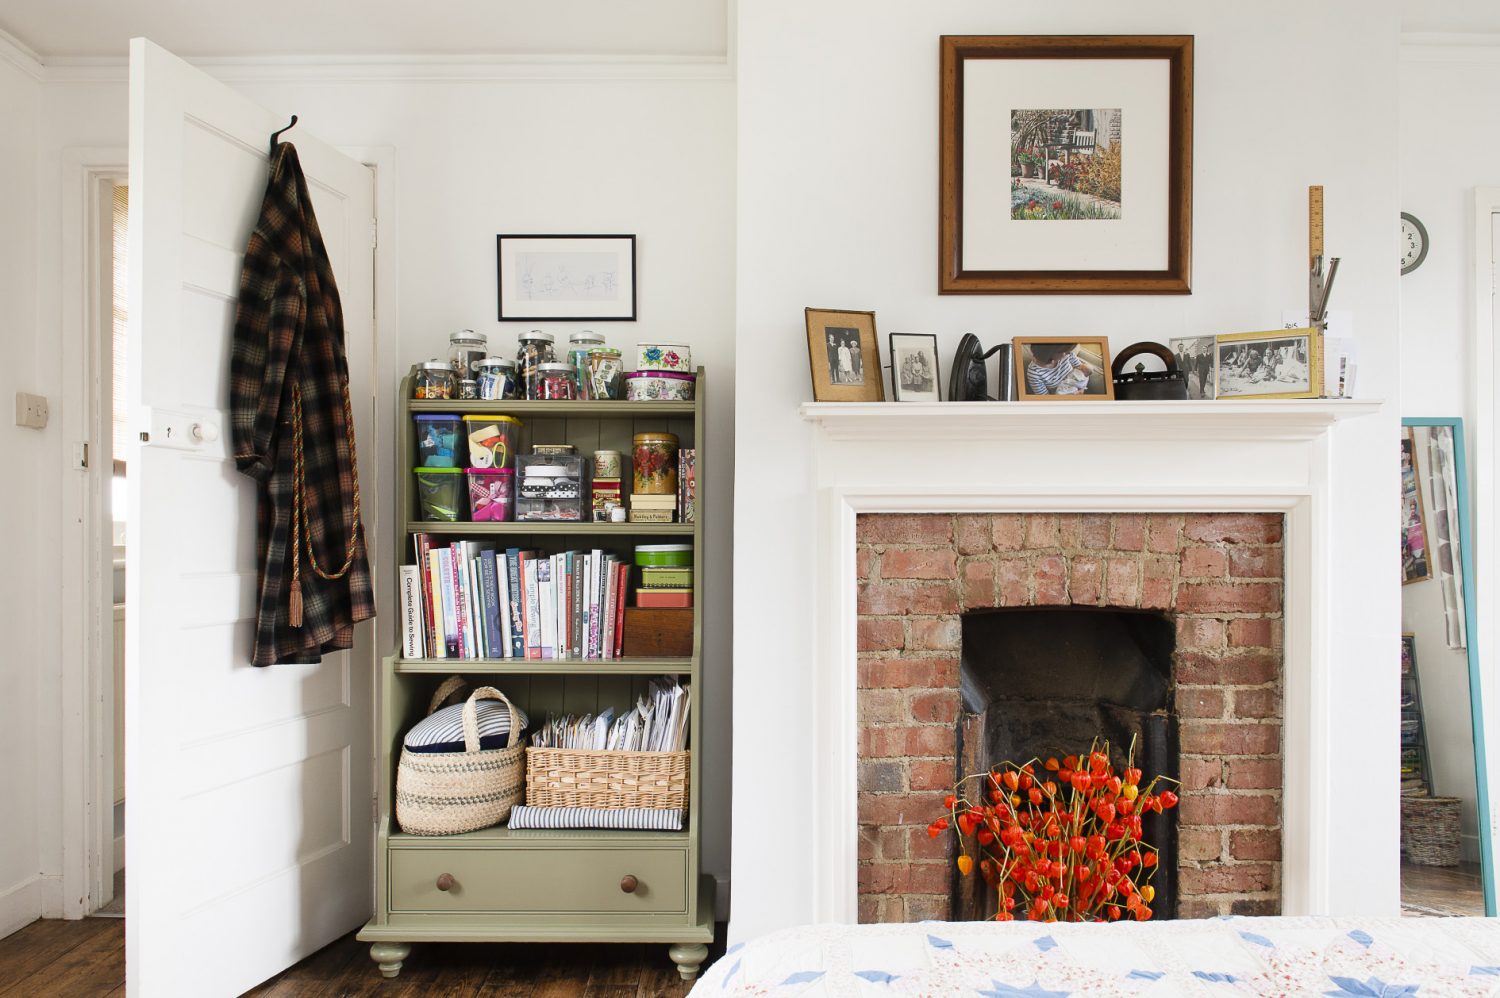 A shelving unit painted in muted, vintage green is used to keep Claire’s collection of buttons, ribbon and other sewing items tidy. Claire made the patchwork quilt herself and has filled another unused fireplace with Chinese Lanterns to add some colour and a sense of warmth to the room